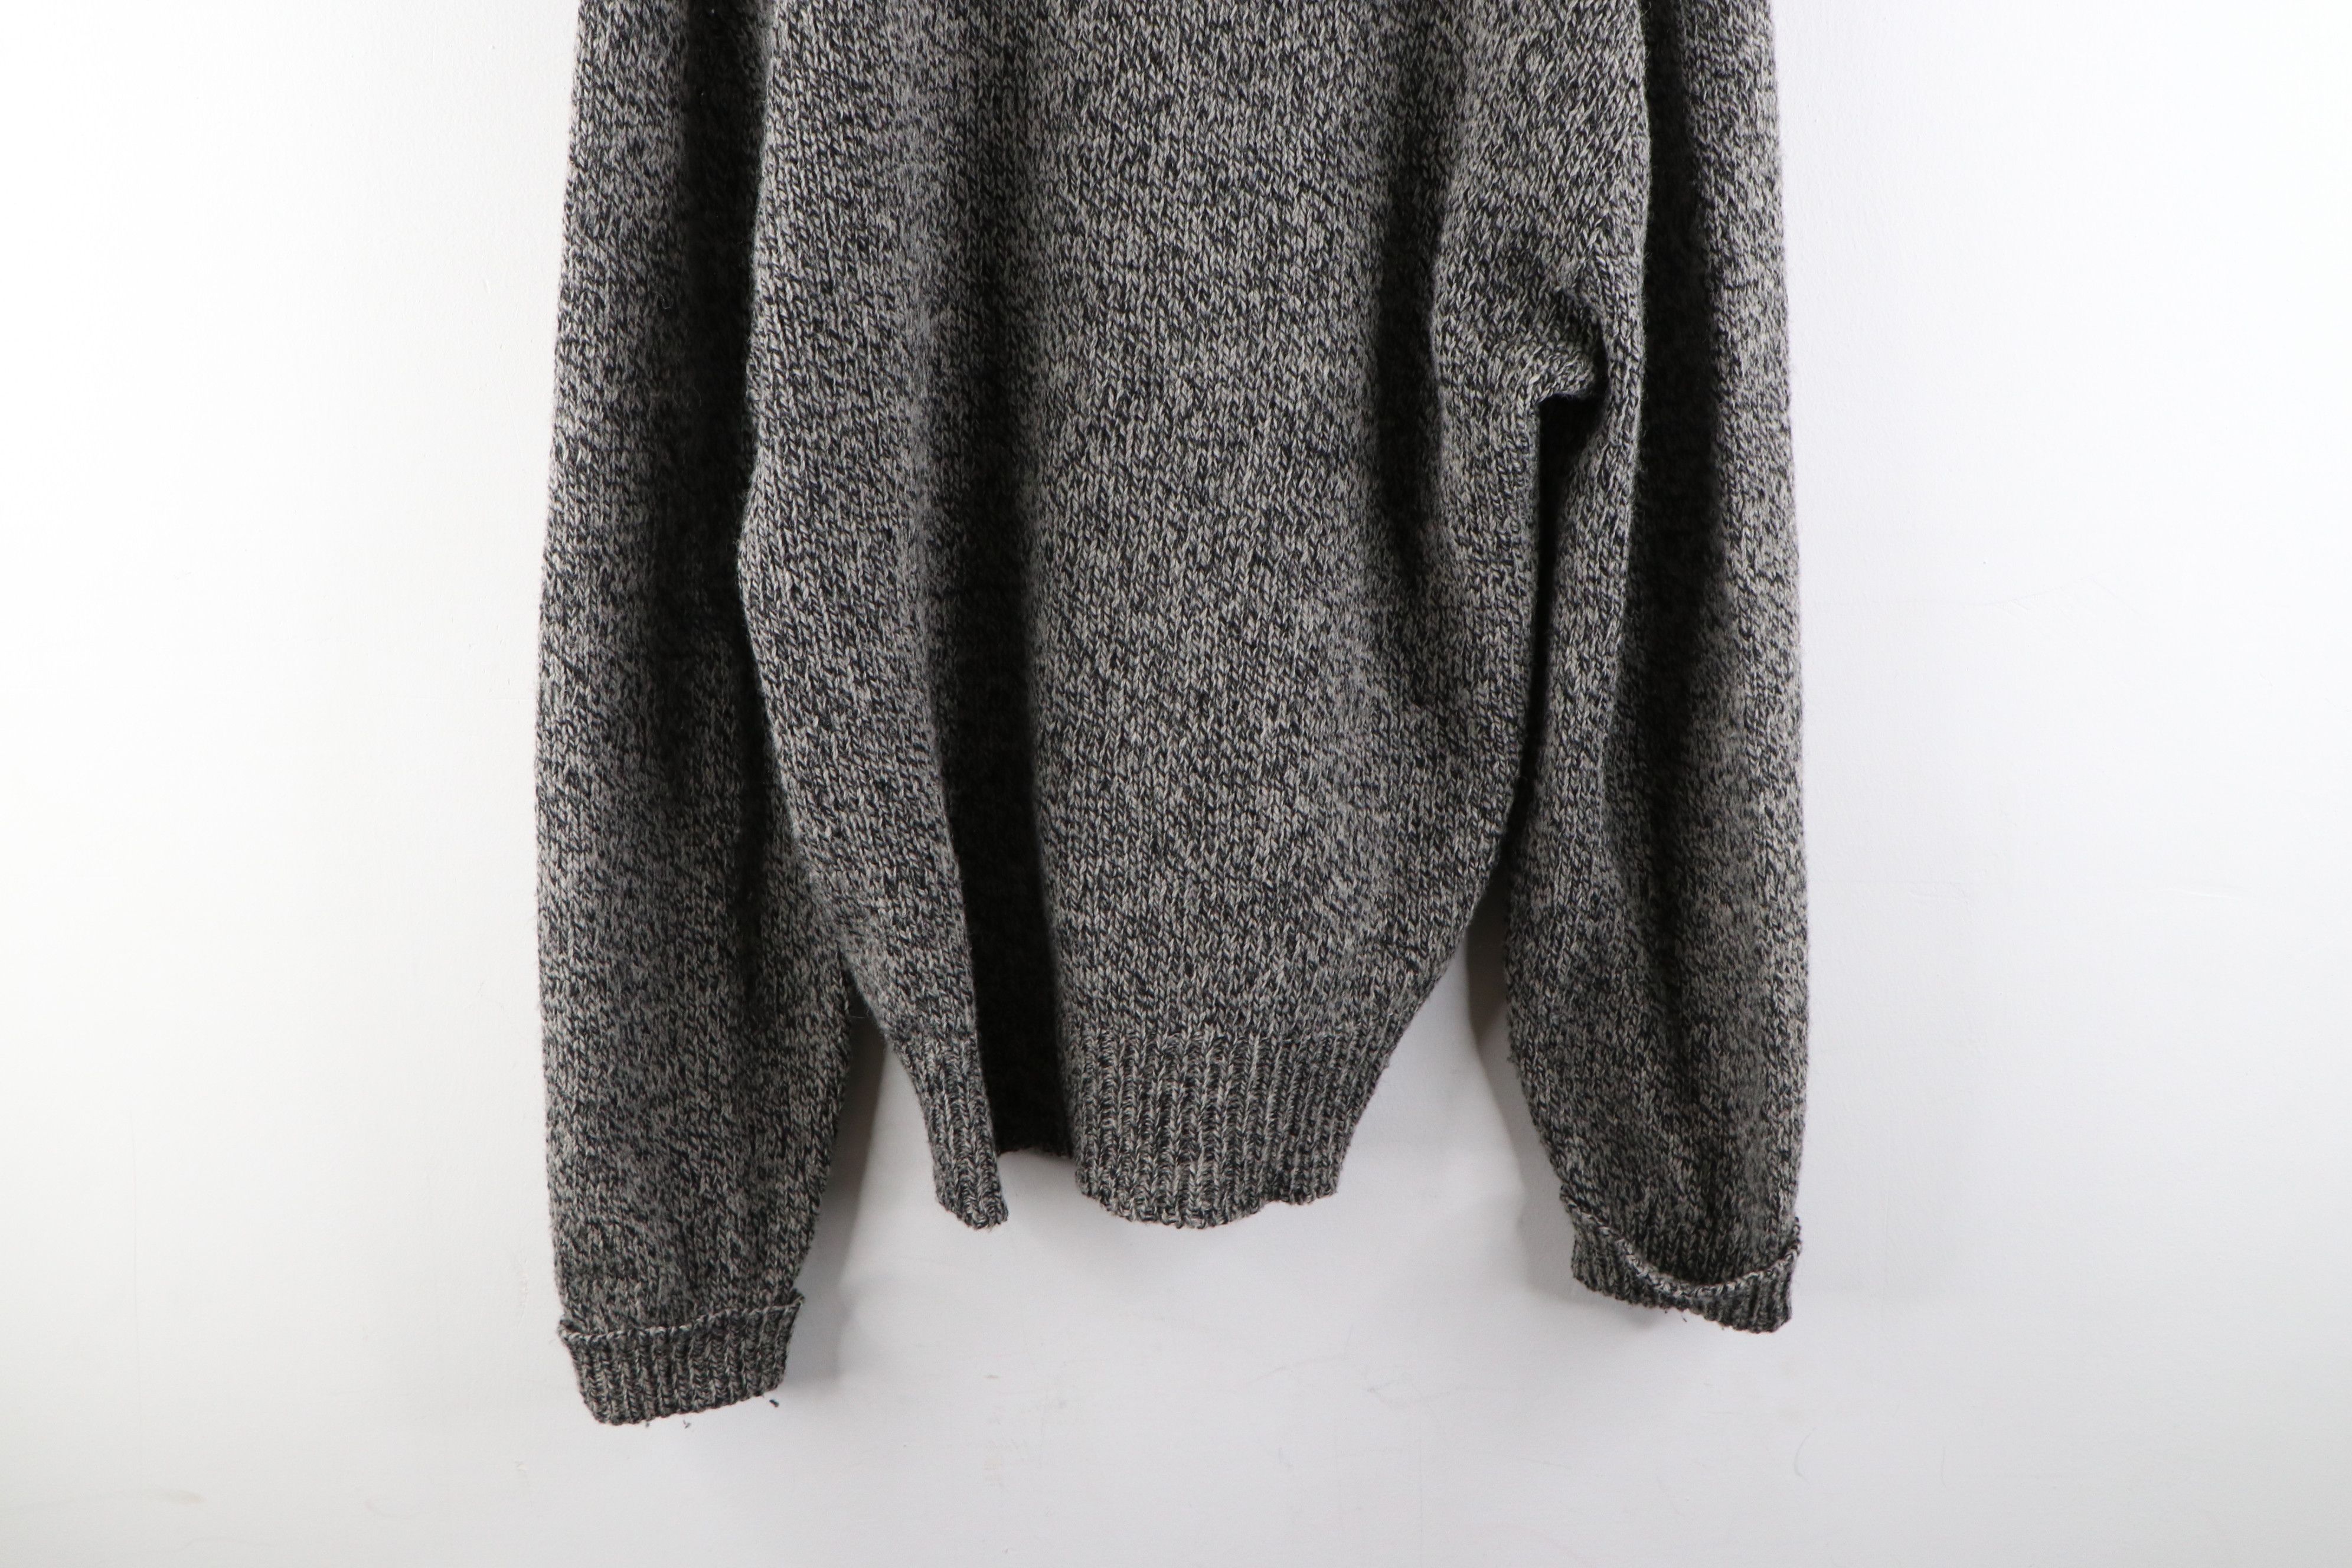 American Eagle Outfitters Vintage 90s American Eagle Wool Knit Shawl Collar Sweater Size US L / EU 52-54 / 3 - 7 Preview